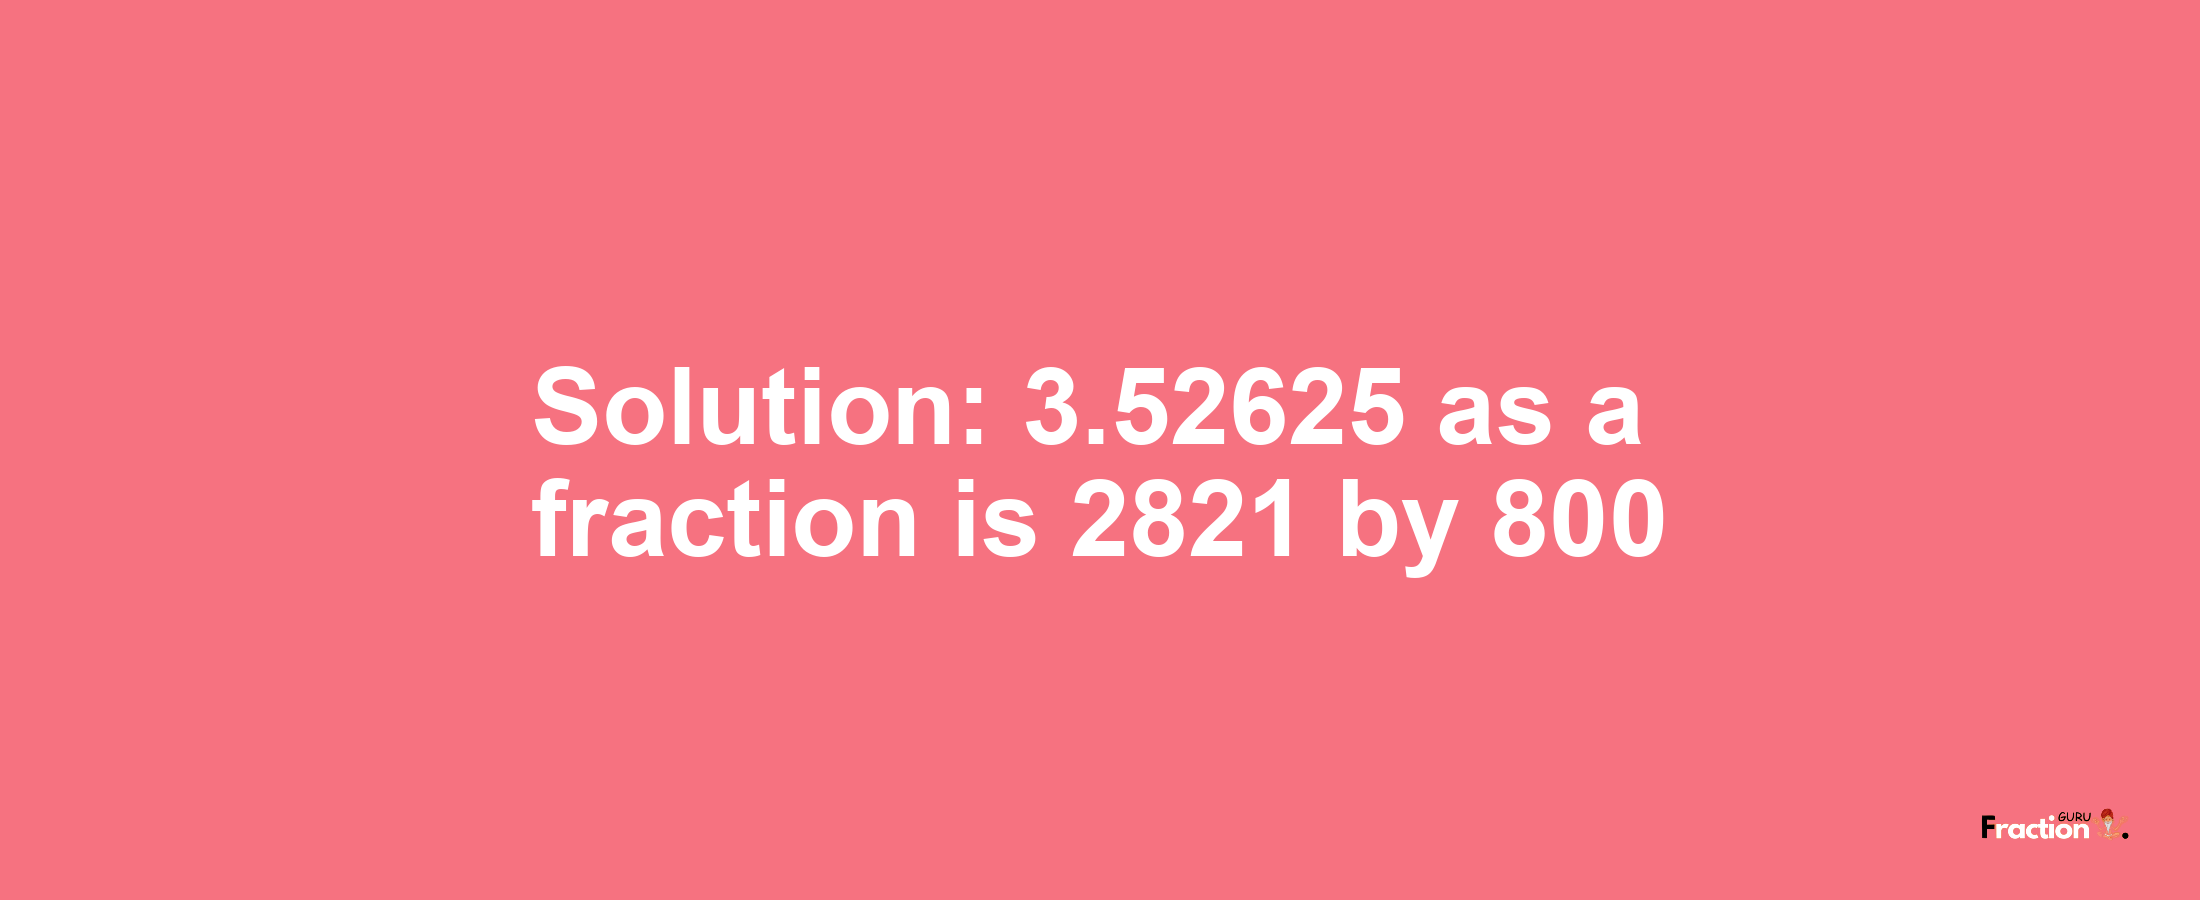 Solution:3.52625 as a fraction is 2821/800